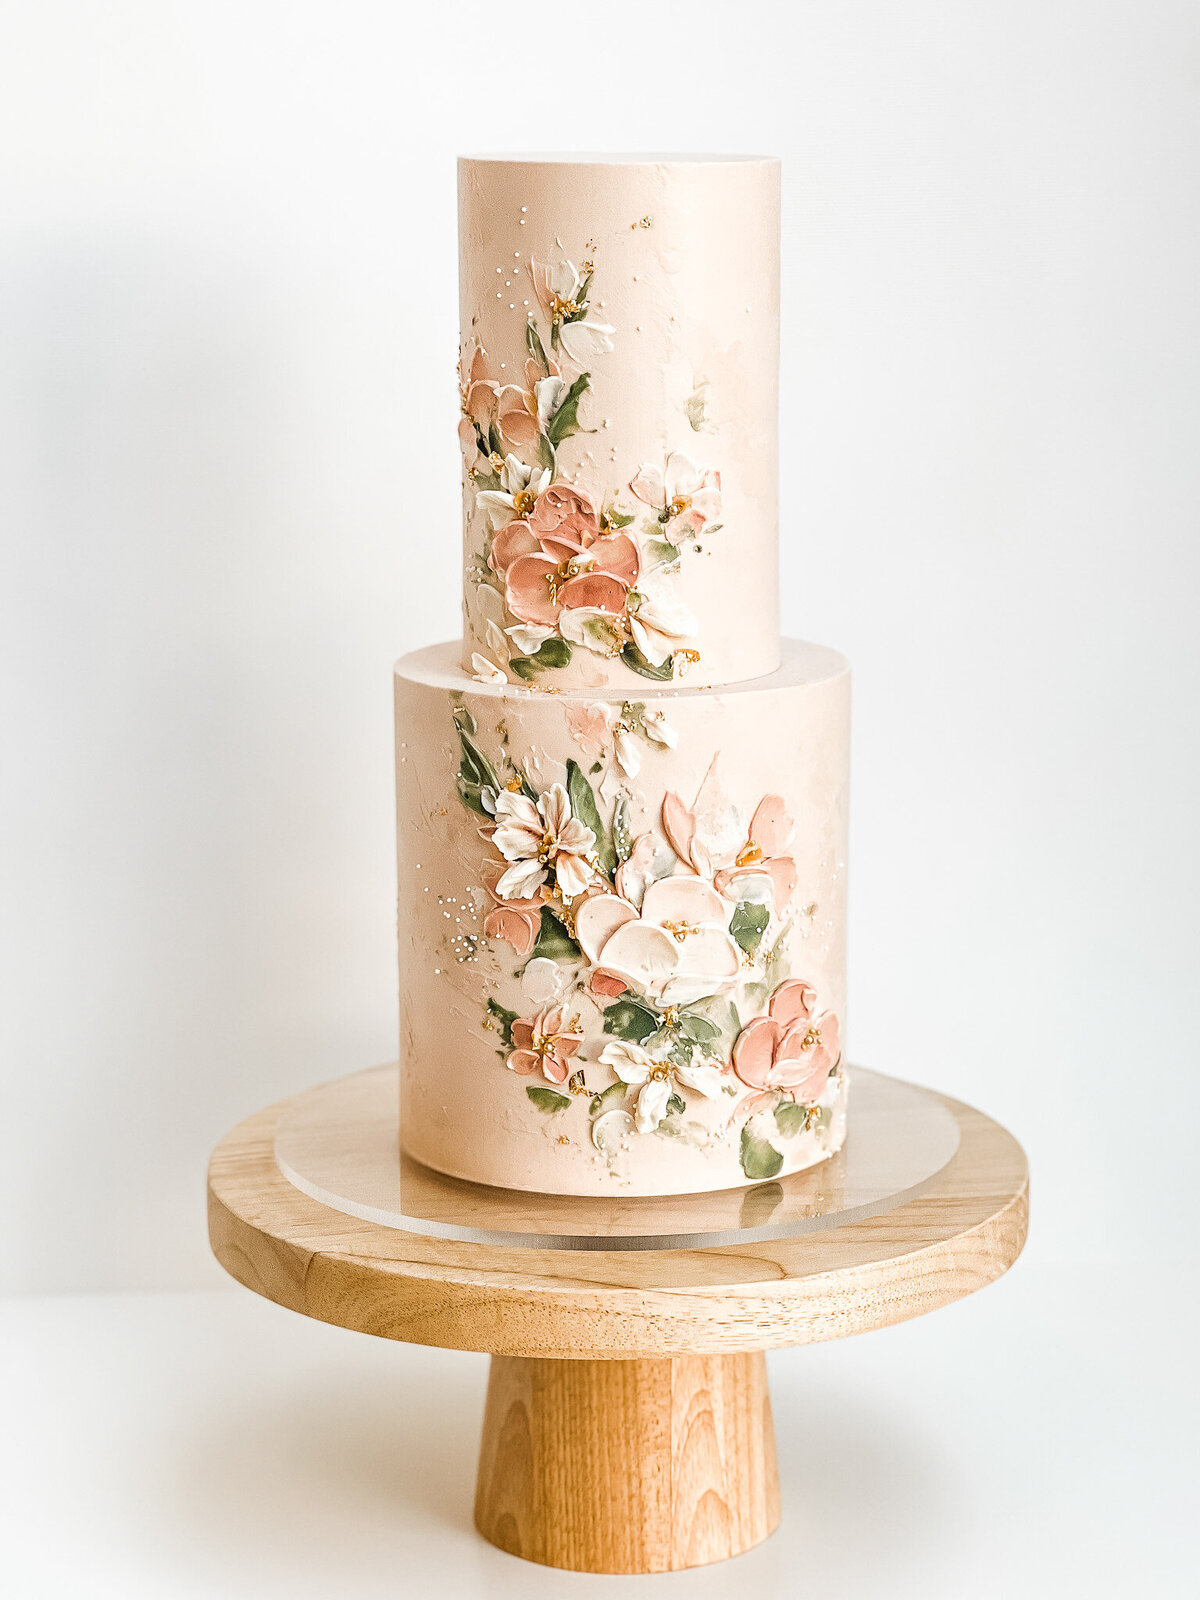 painted buttercream floral wedding cake